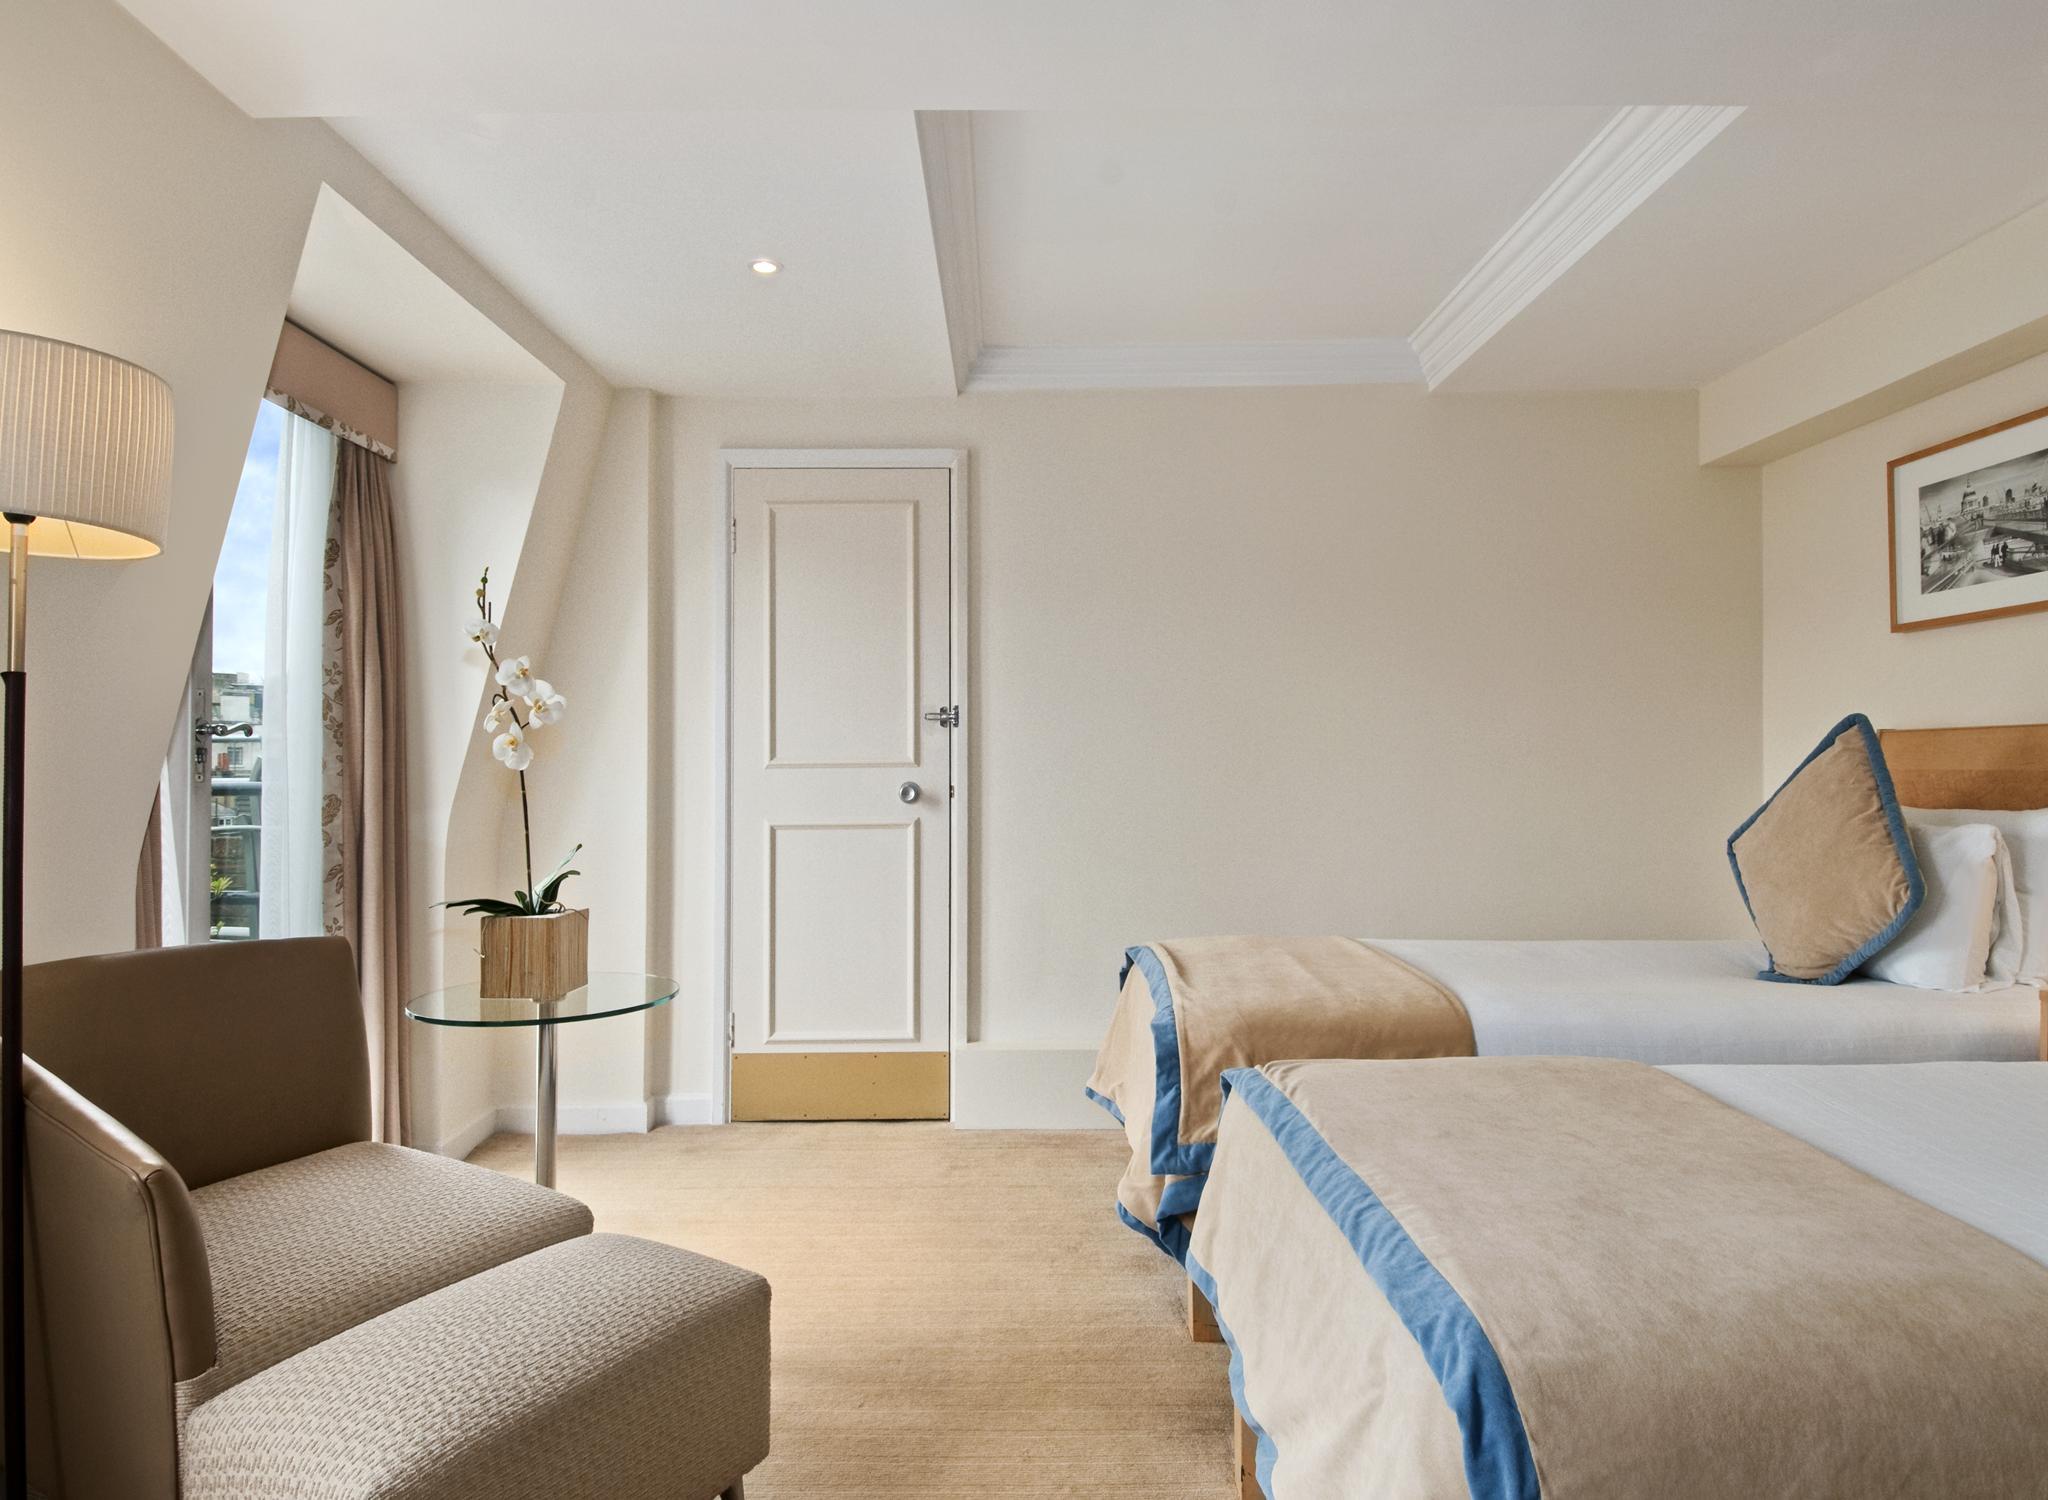 The Mayfair Townhouse - An Iconic Luxury Hotel London Room photo